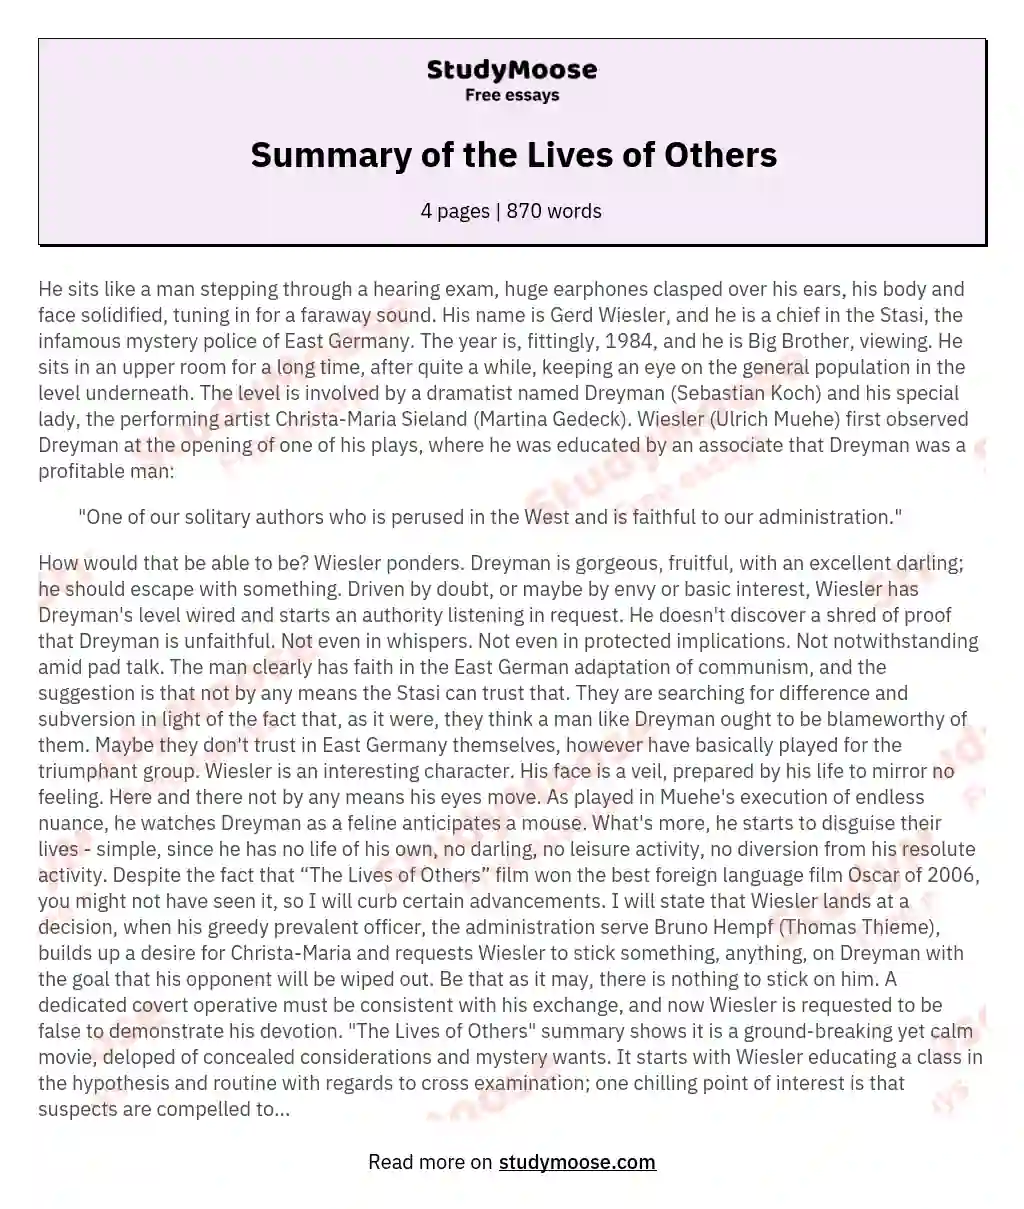 Summary of the Lives of Others essay